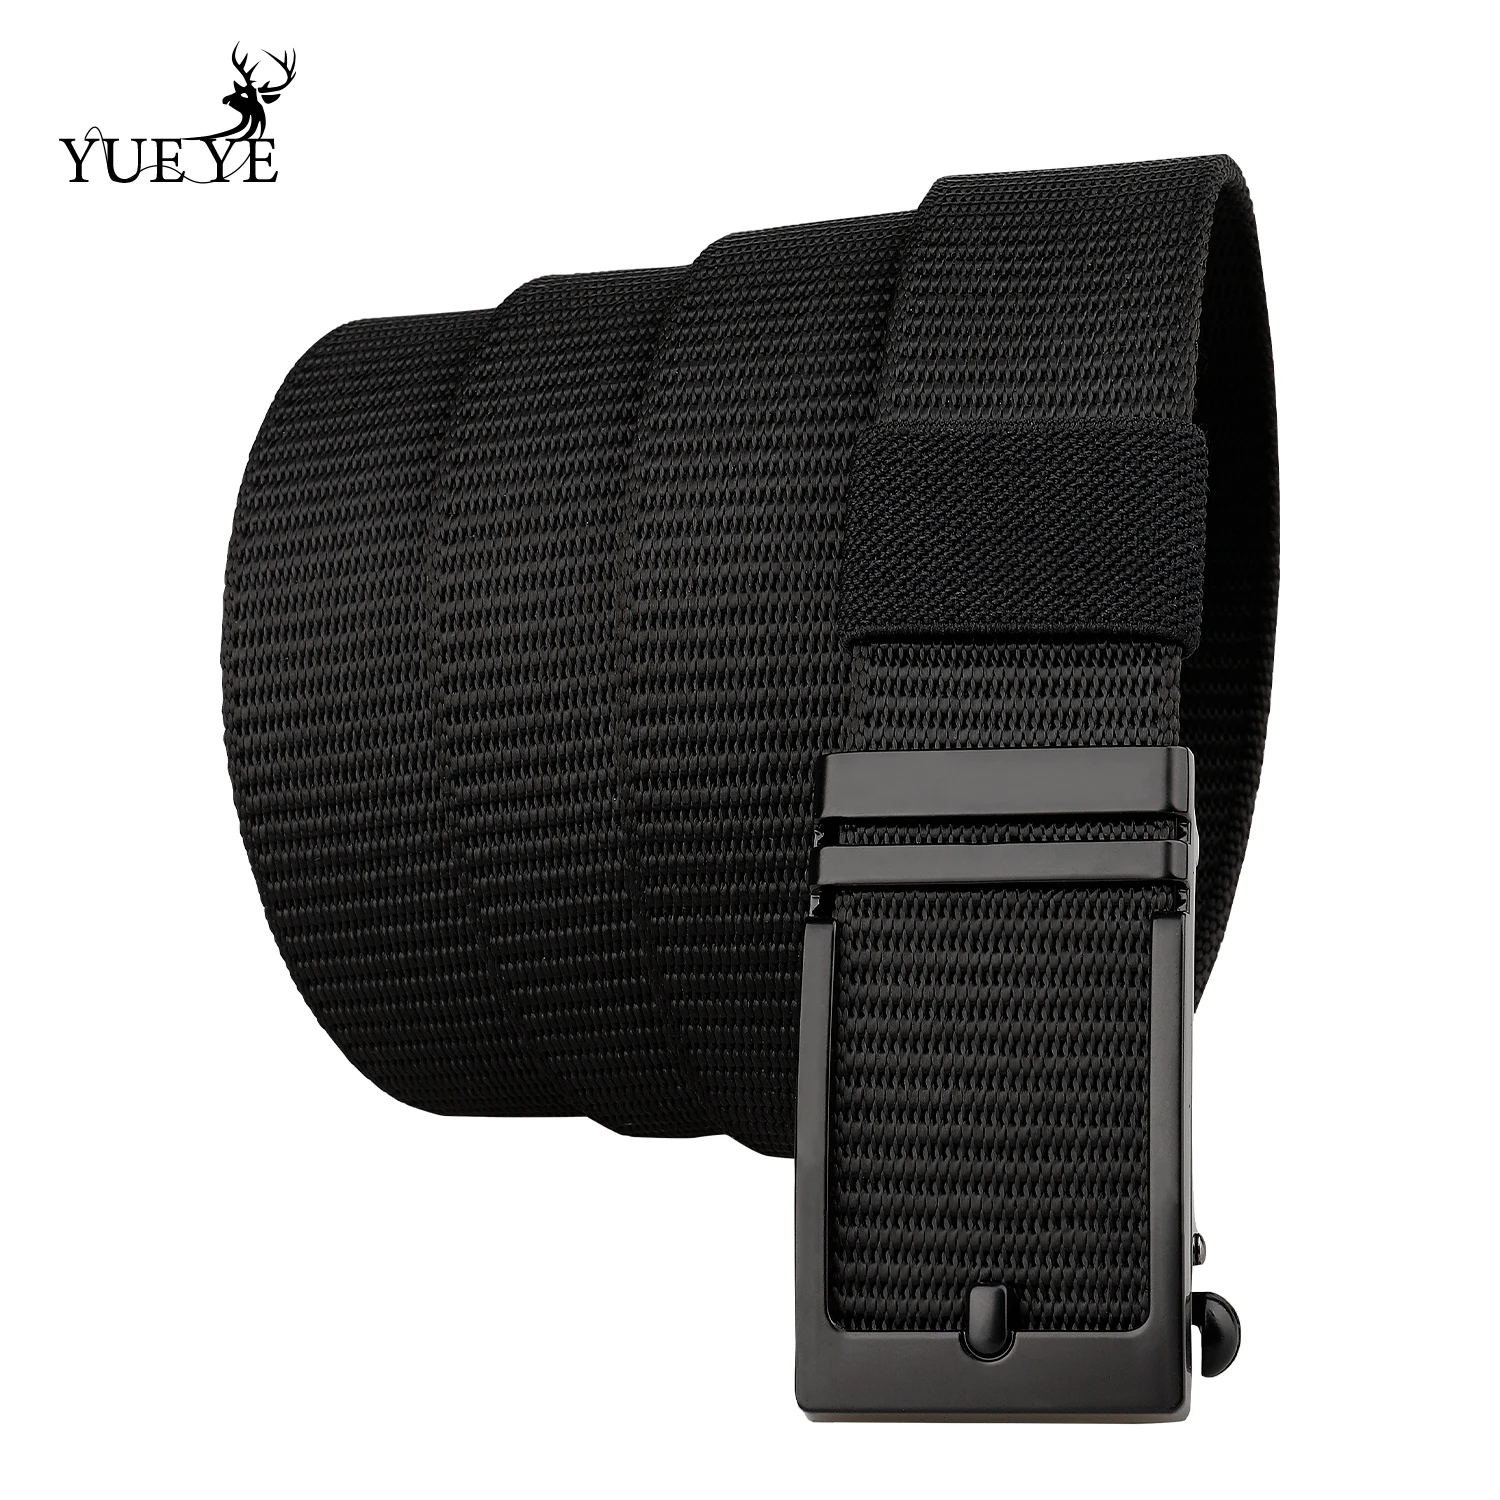 

Men's canvas belt high quality nylon alloy buckle leisure sports belt toothless automatic buckle 125cm high quality belt